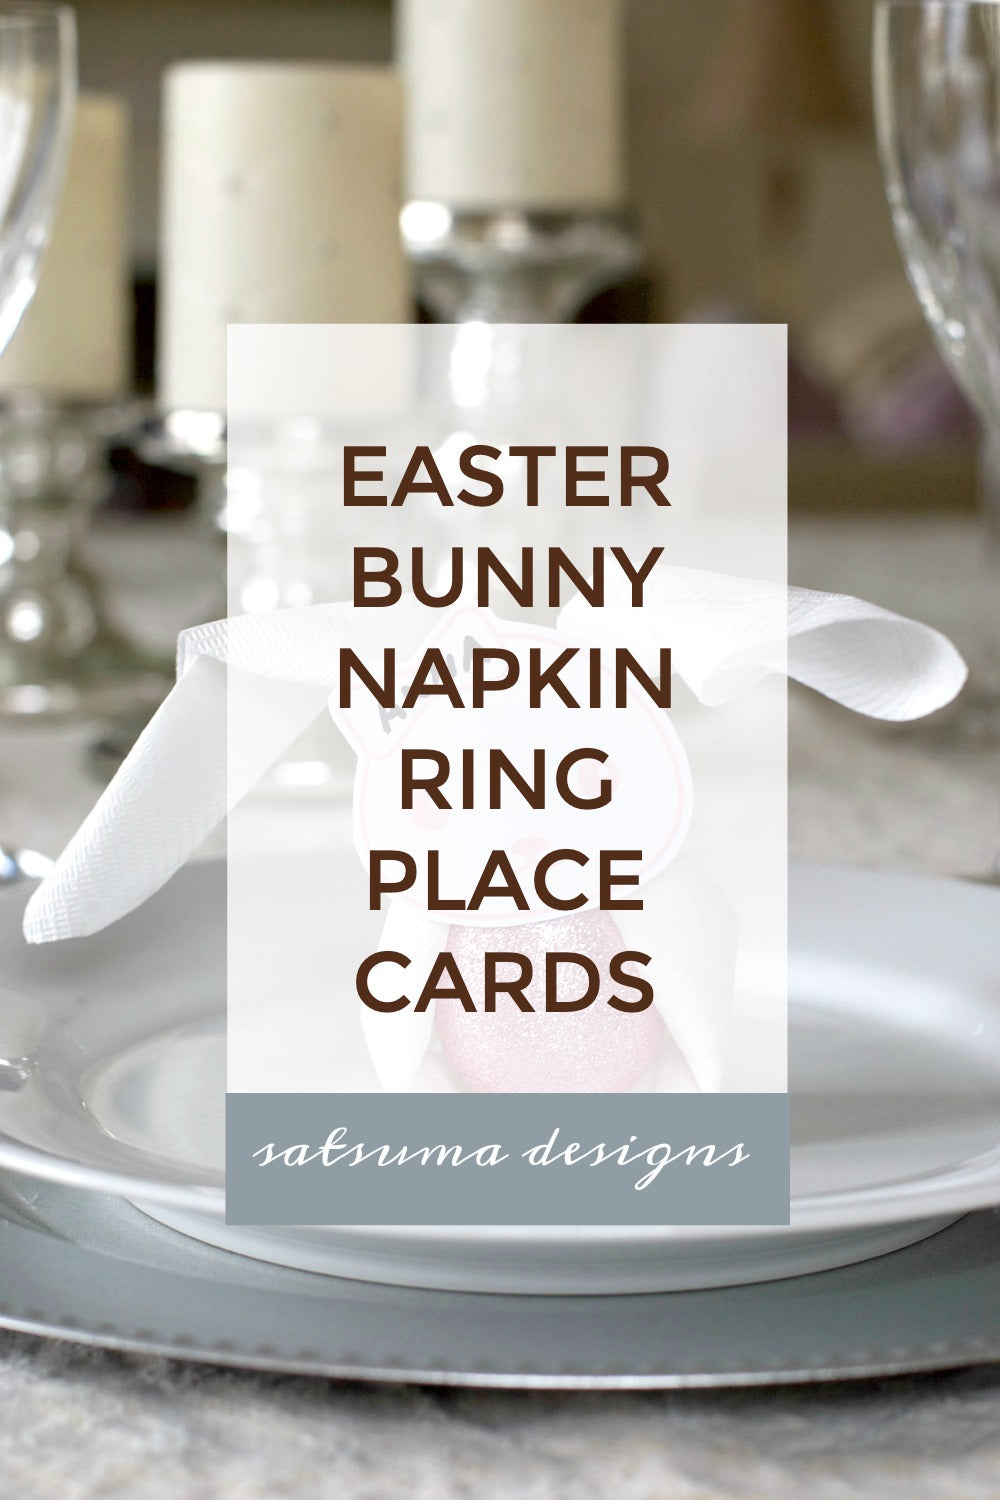 Easy DIY Kids Table Easter Bunny Napkin Ring Place Cards